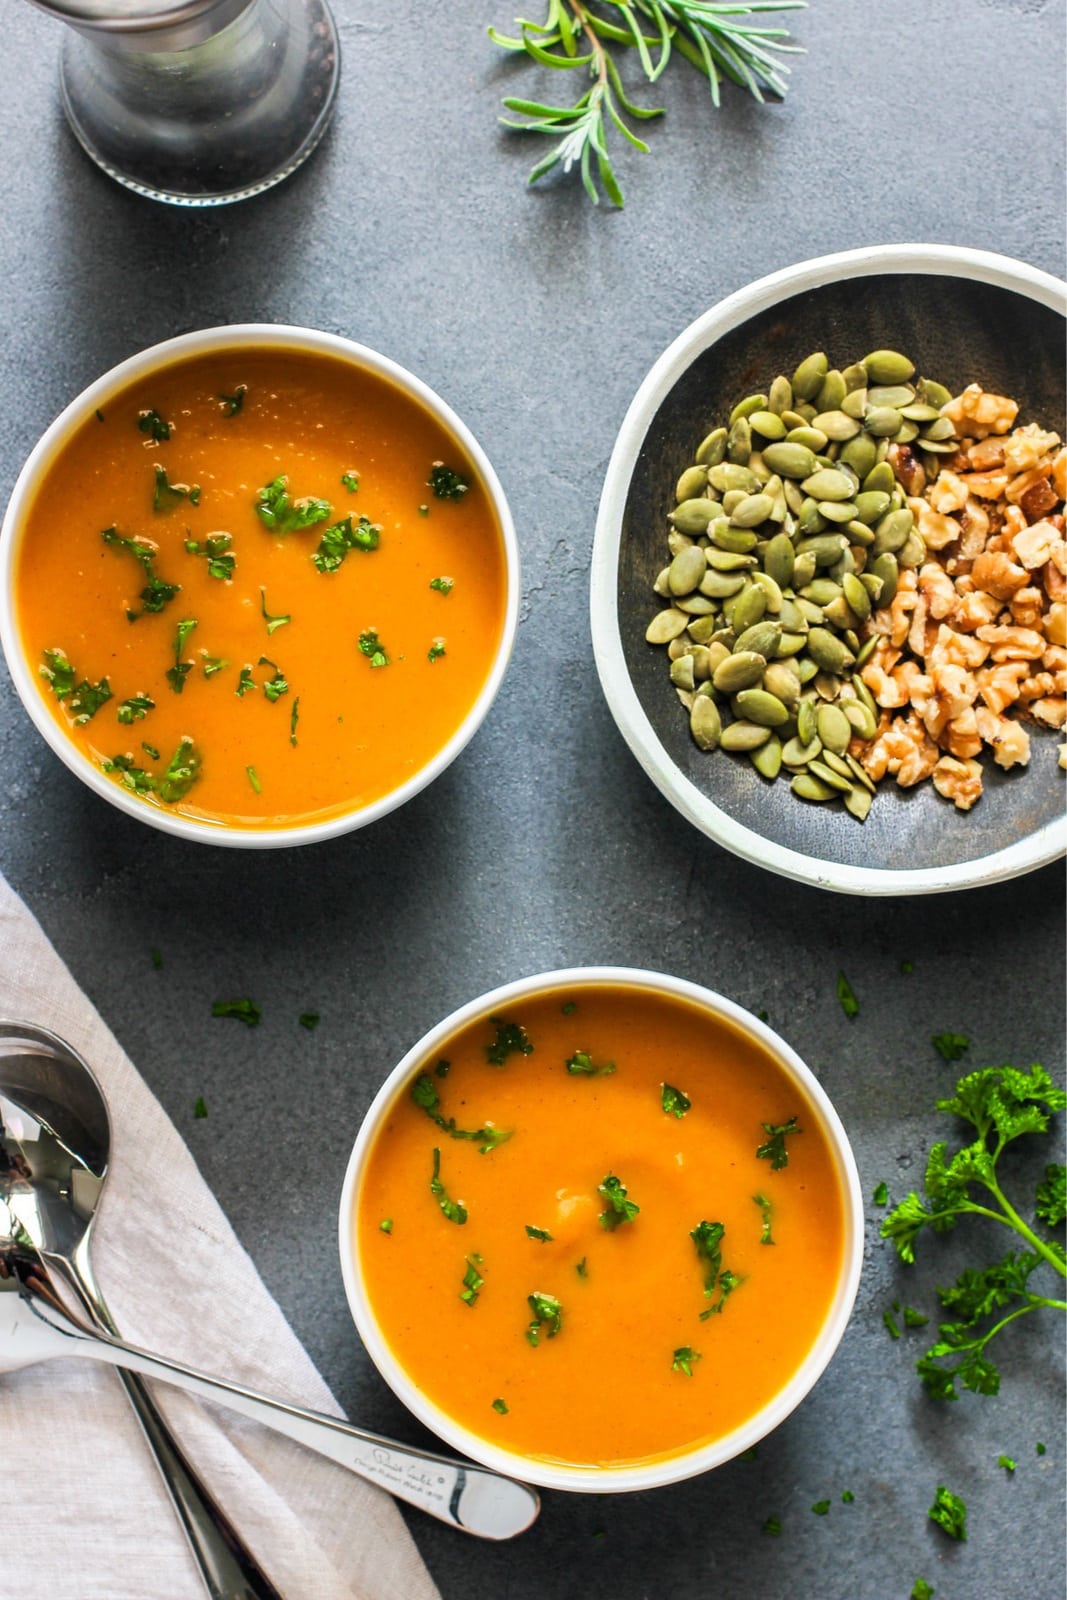 2 bowls of orange colored soup with green garnish next to a plate with seeds